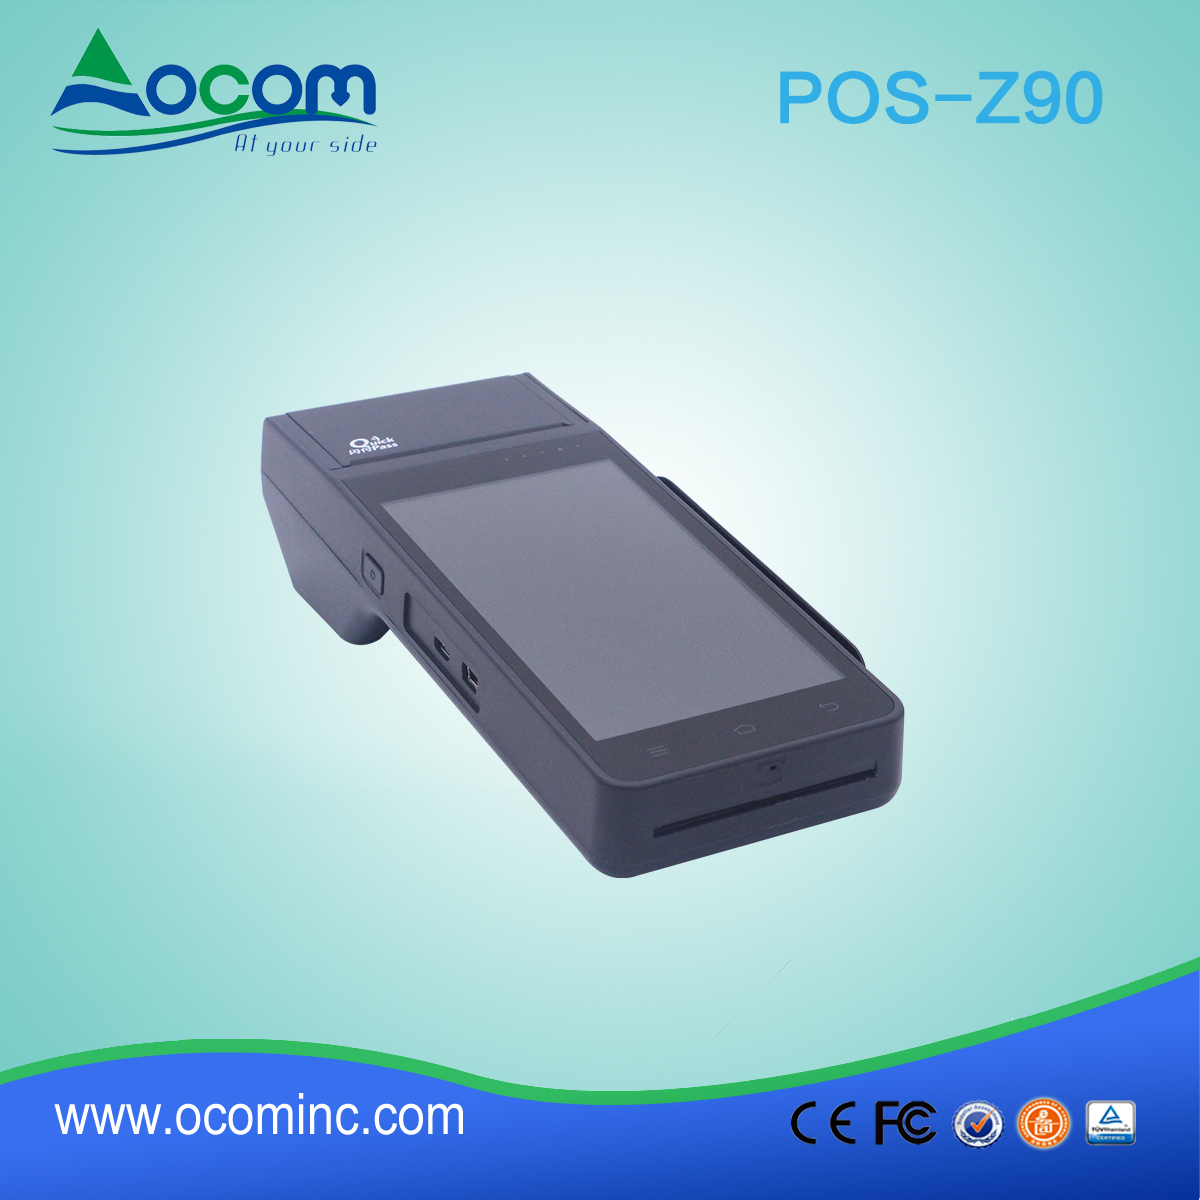 (POS-Z90) Low-cost Android Handheld POS Terminal met thermische printer